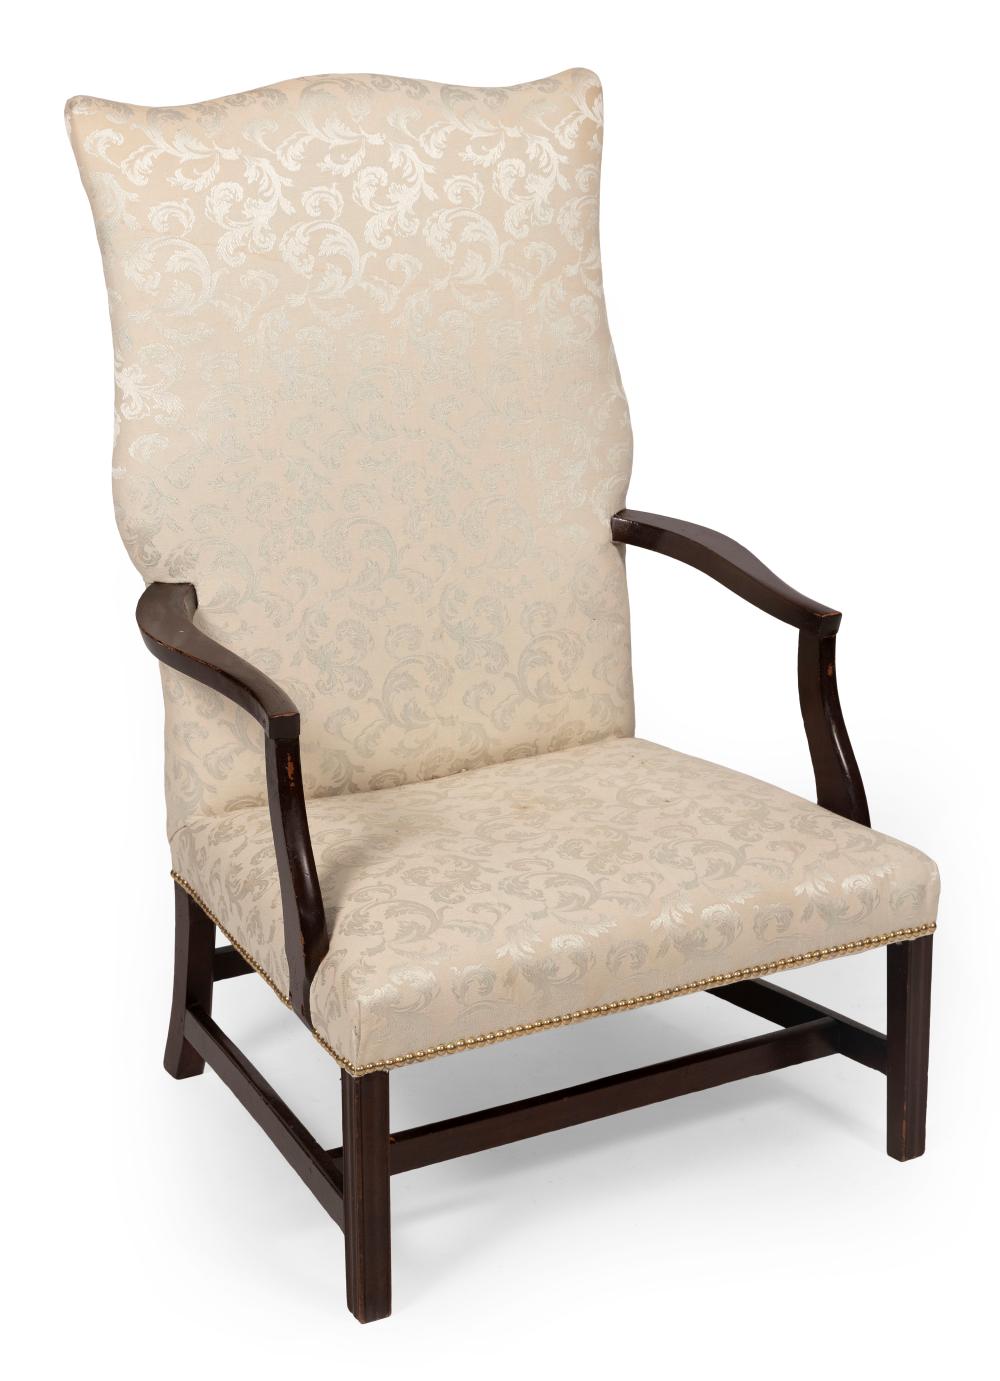 CHIPPENDALE LOLLING CHAIR AMERICA,